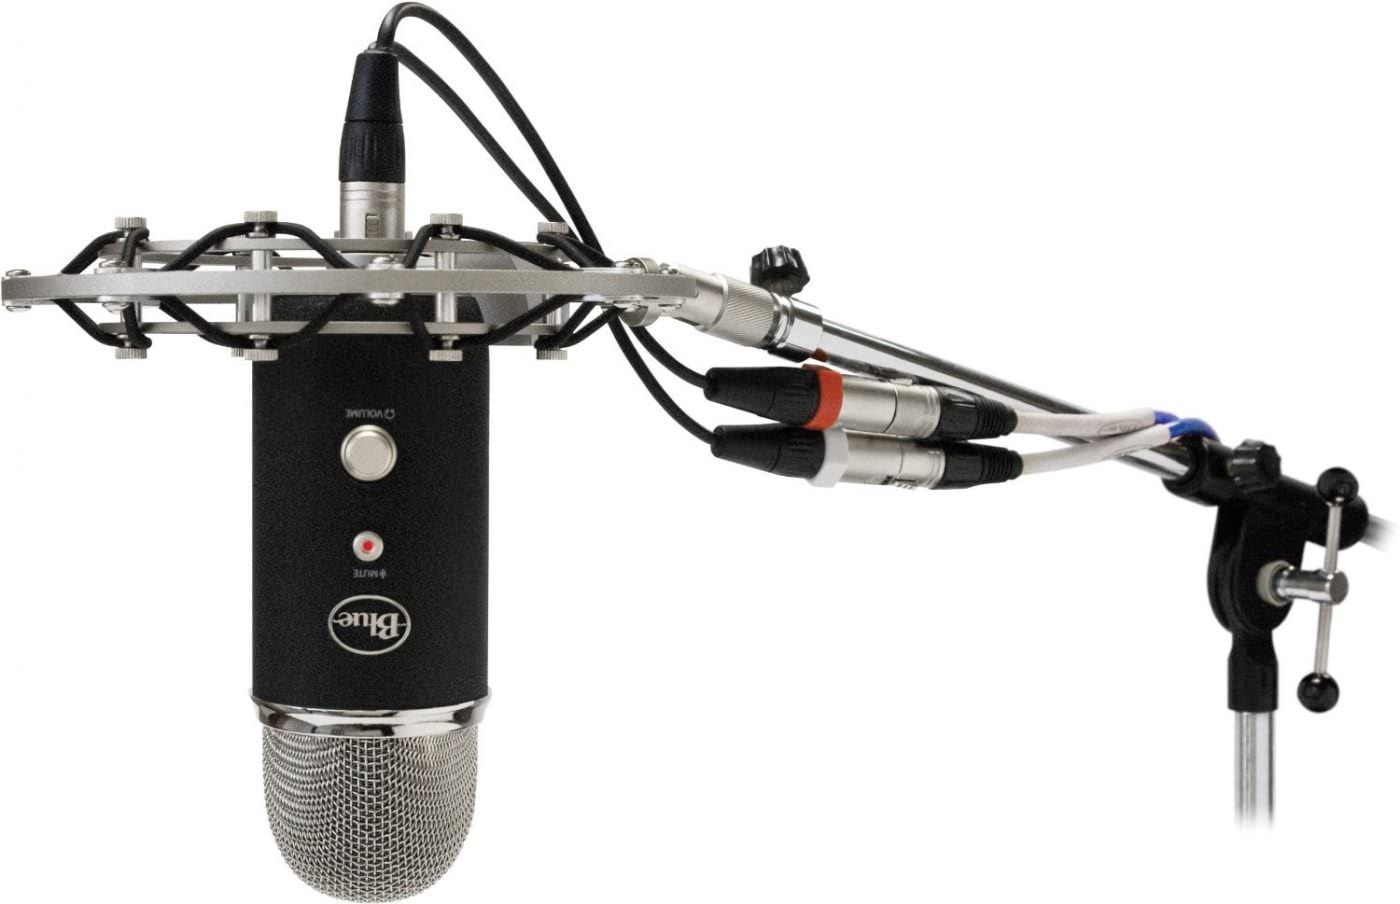 What Microphone Booms Work With The Blue Yeti USB Microphone